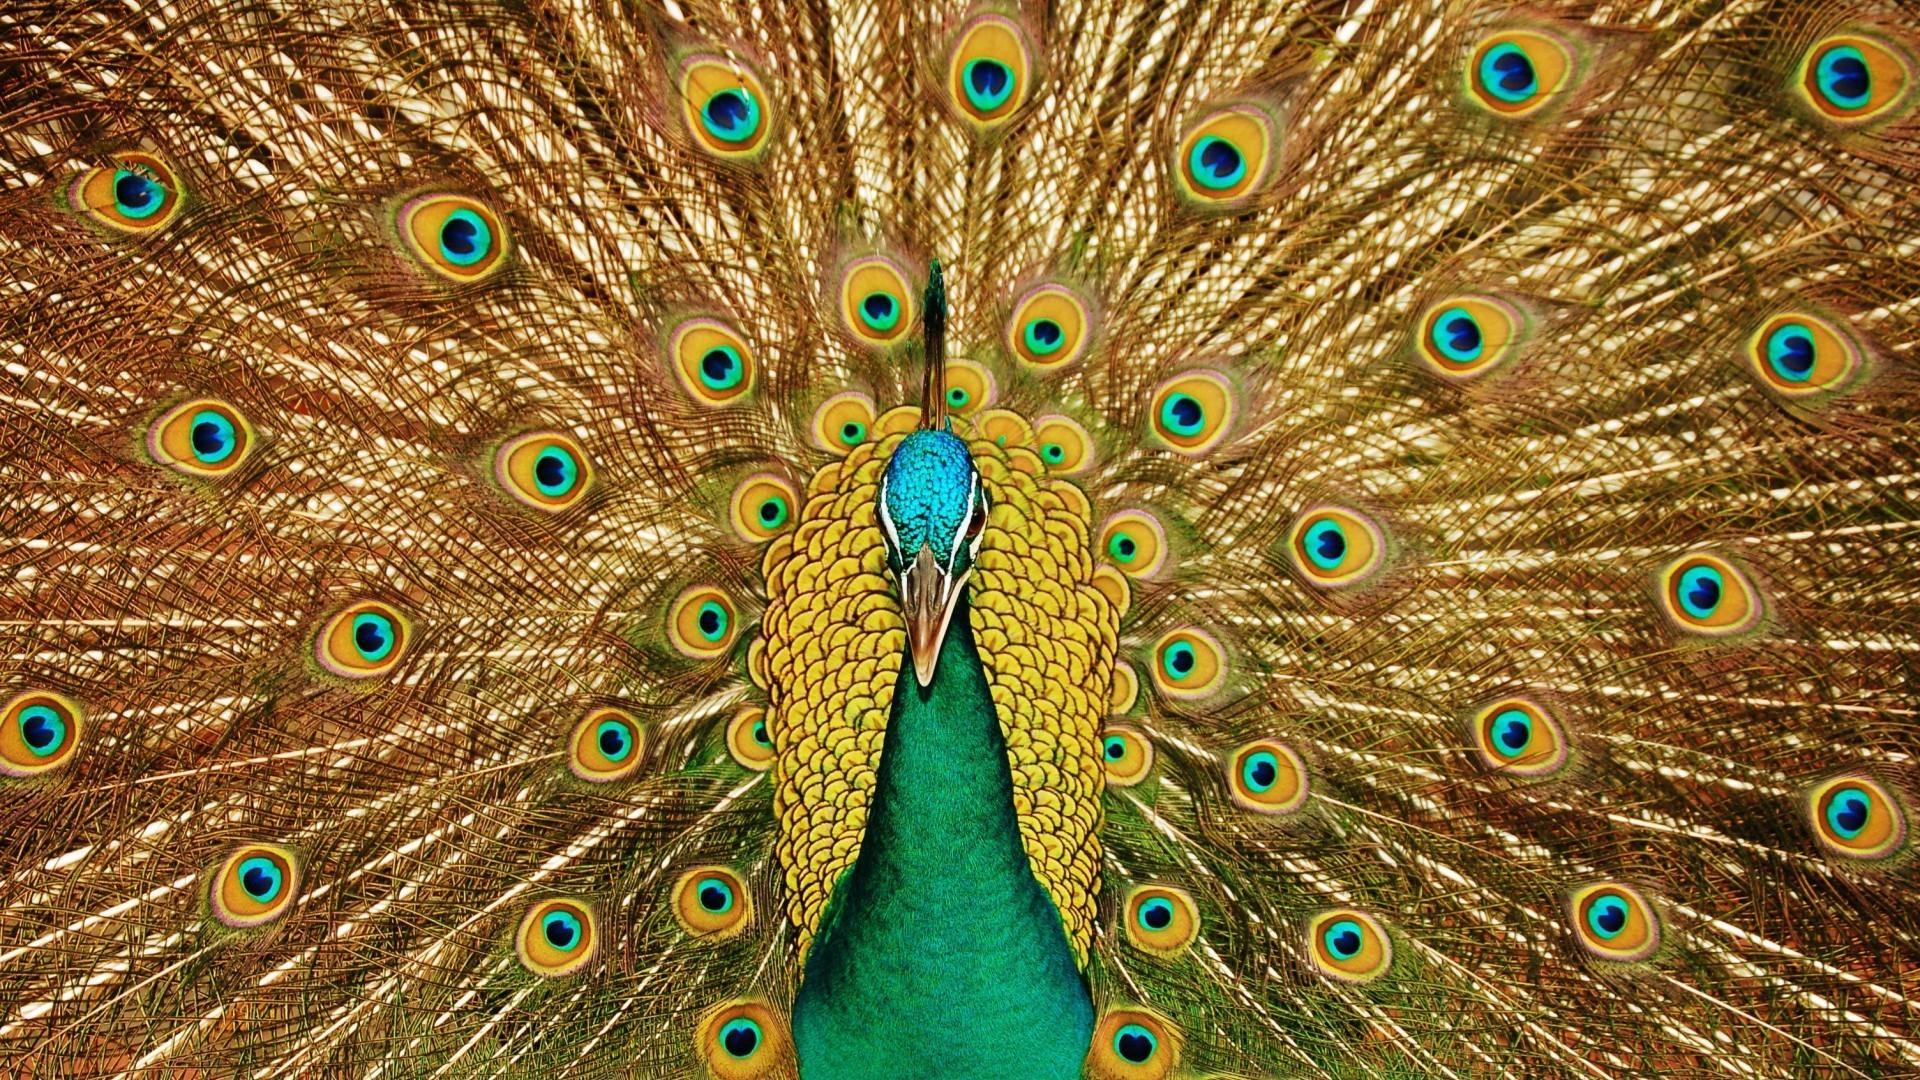 Peacock Hd Wallpapers 1080p , HD Wallpaper & Backgrounds